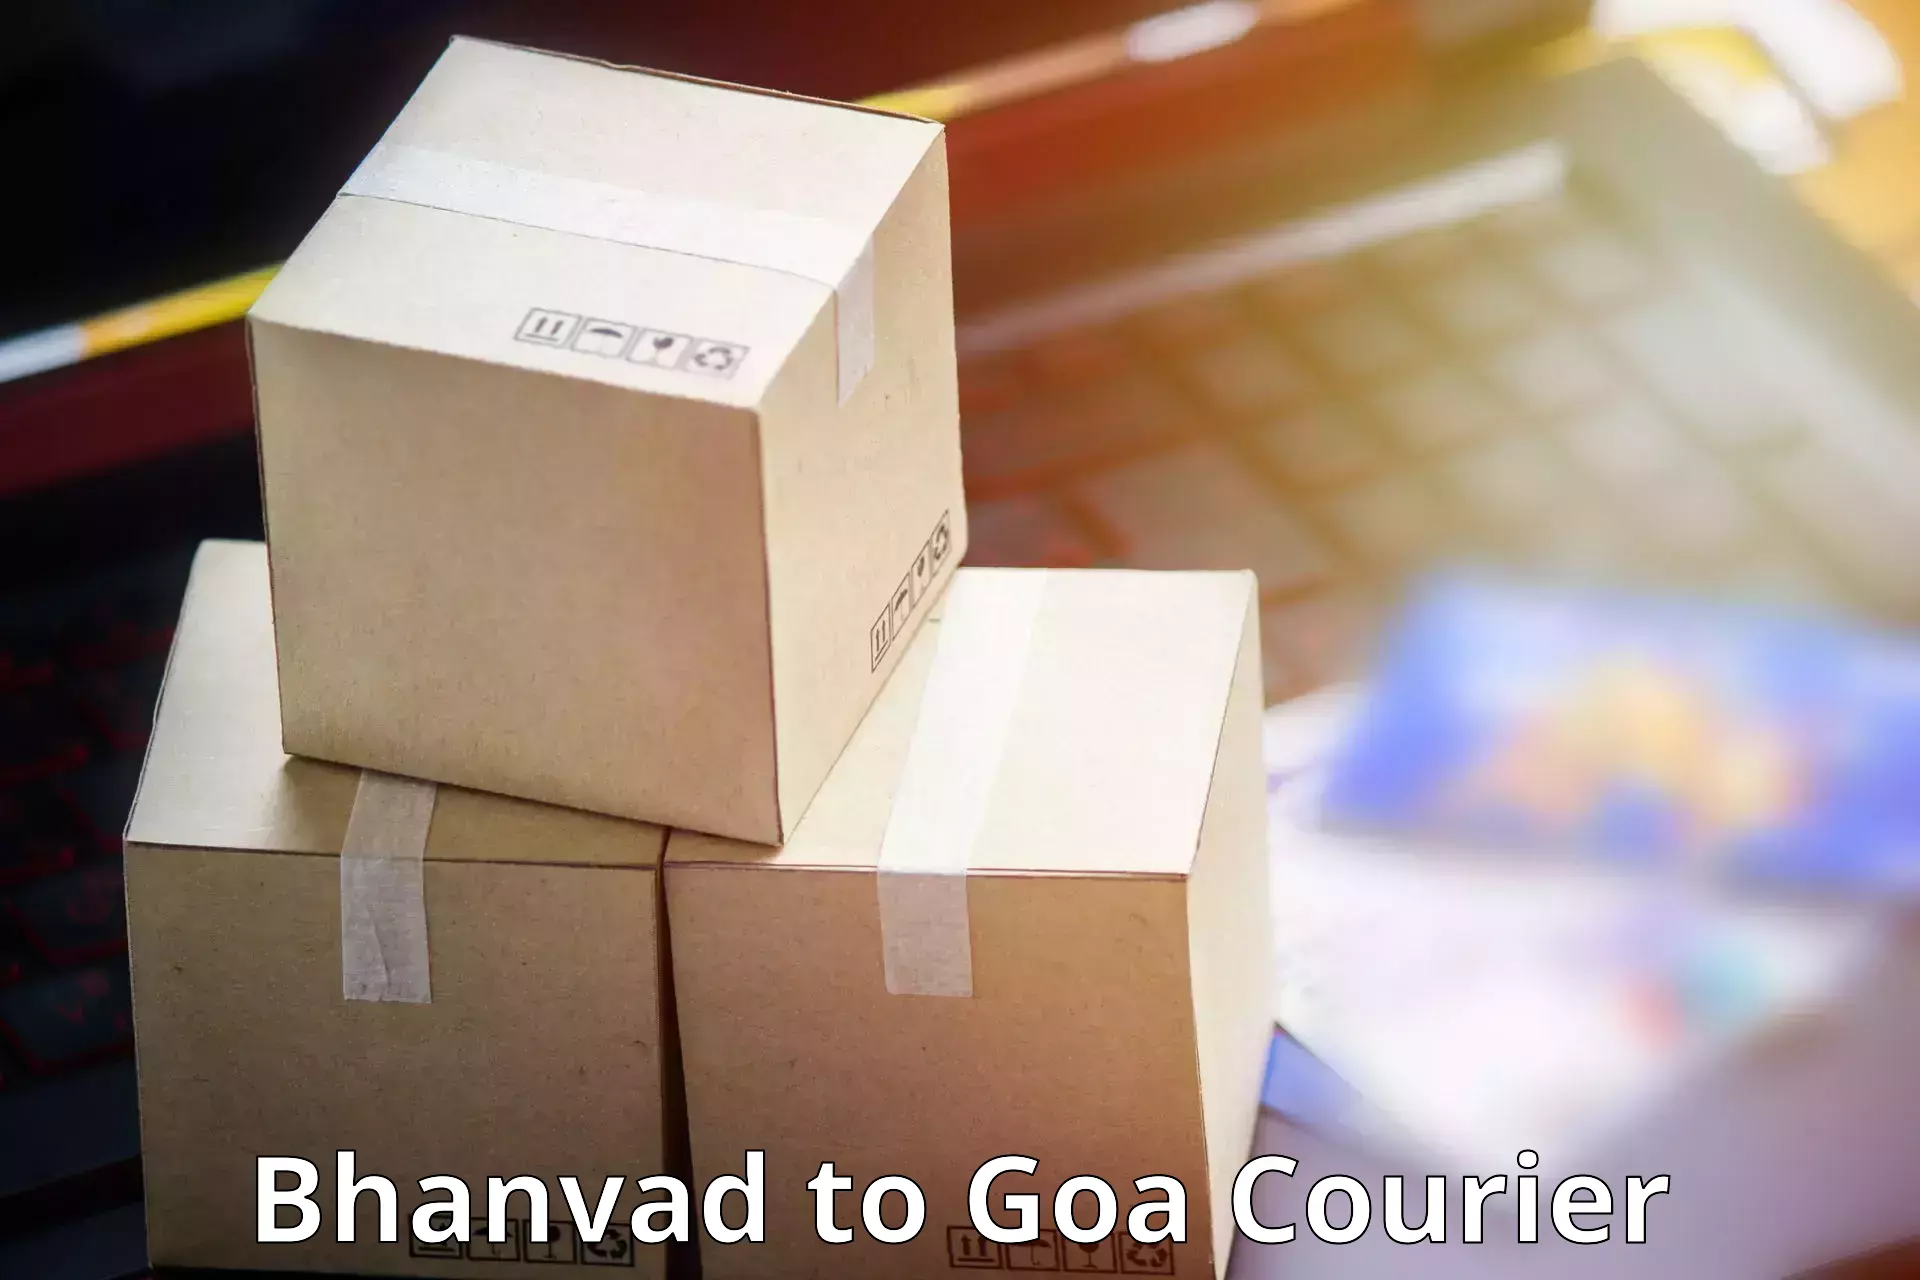 Bulk courier orders Bhanvad to Bicholim